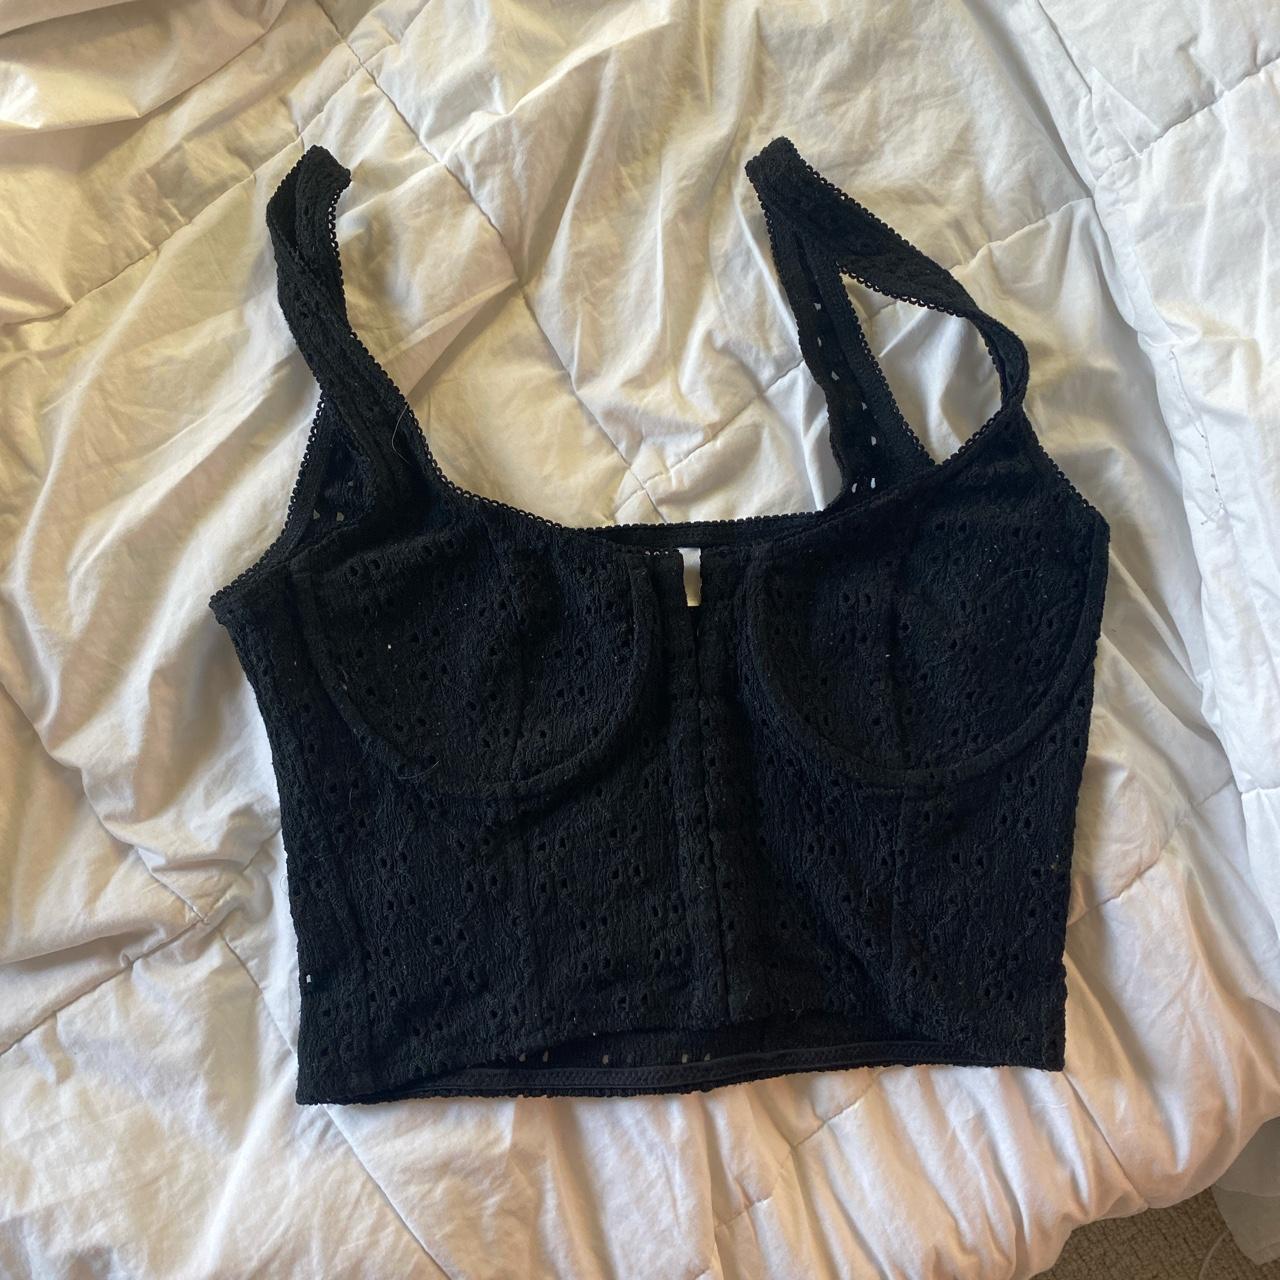 h&m DIVIDED cropped bustier top!! super cute rarely - Depop